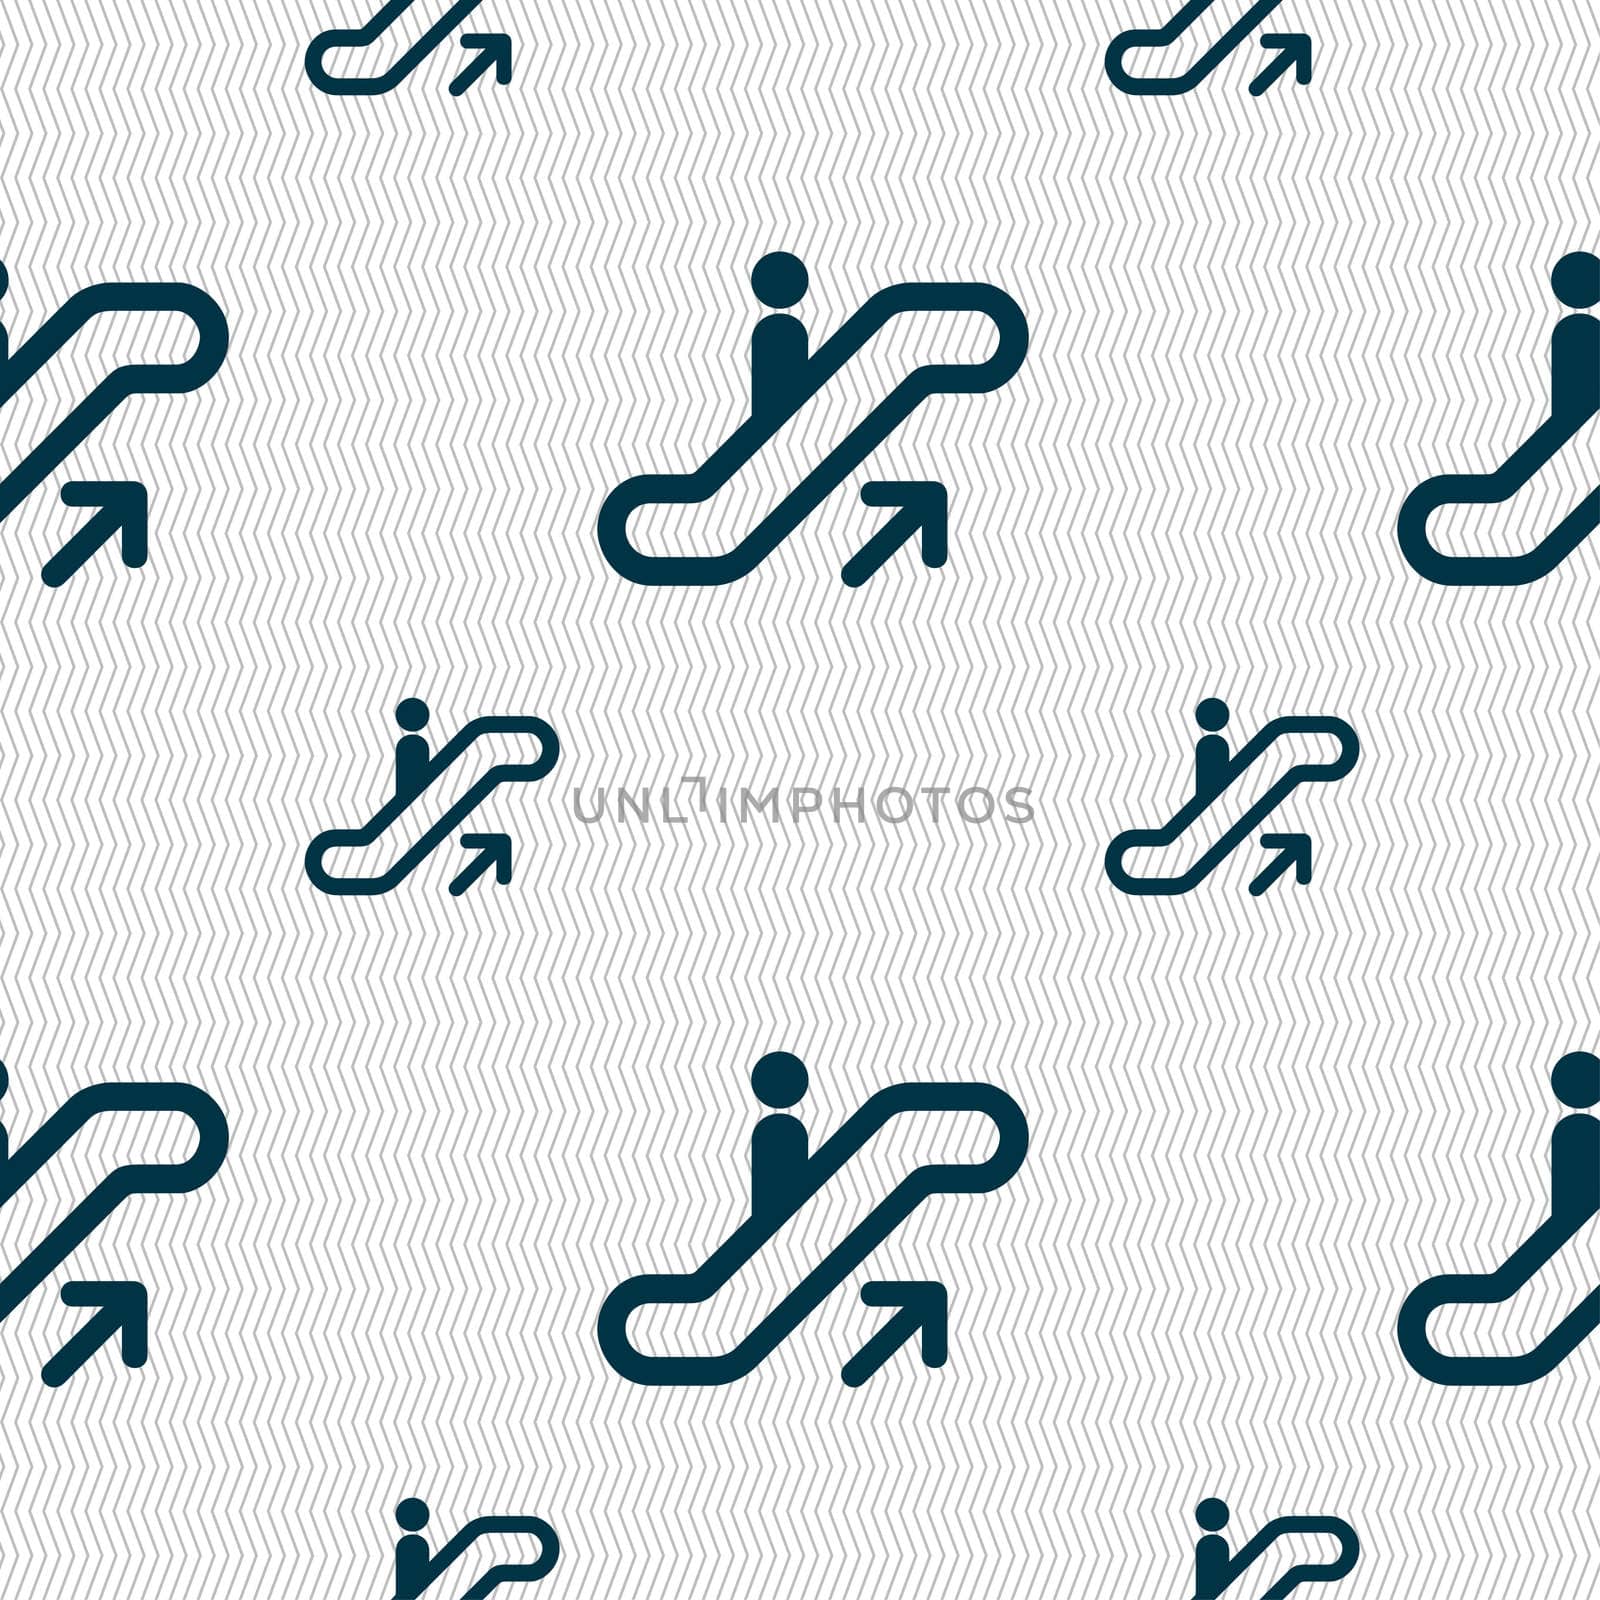 elevator, Escalator, Staircase icon sign. Seamless pattern with geometric texture. illustration